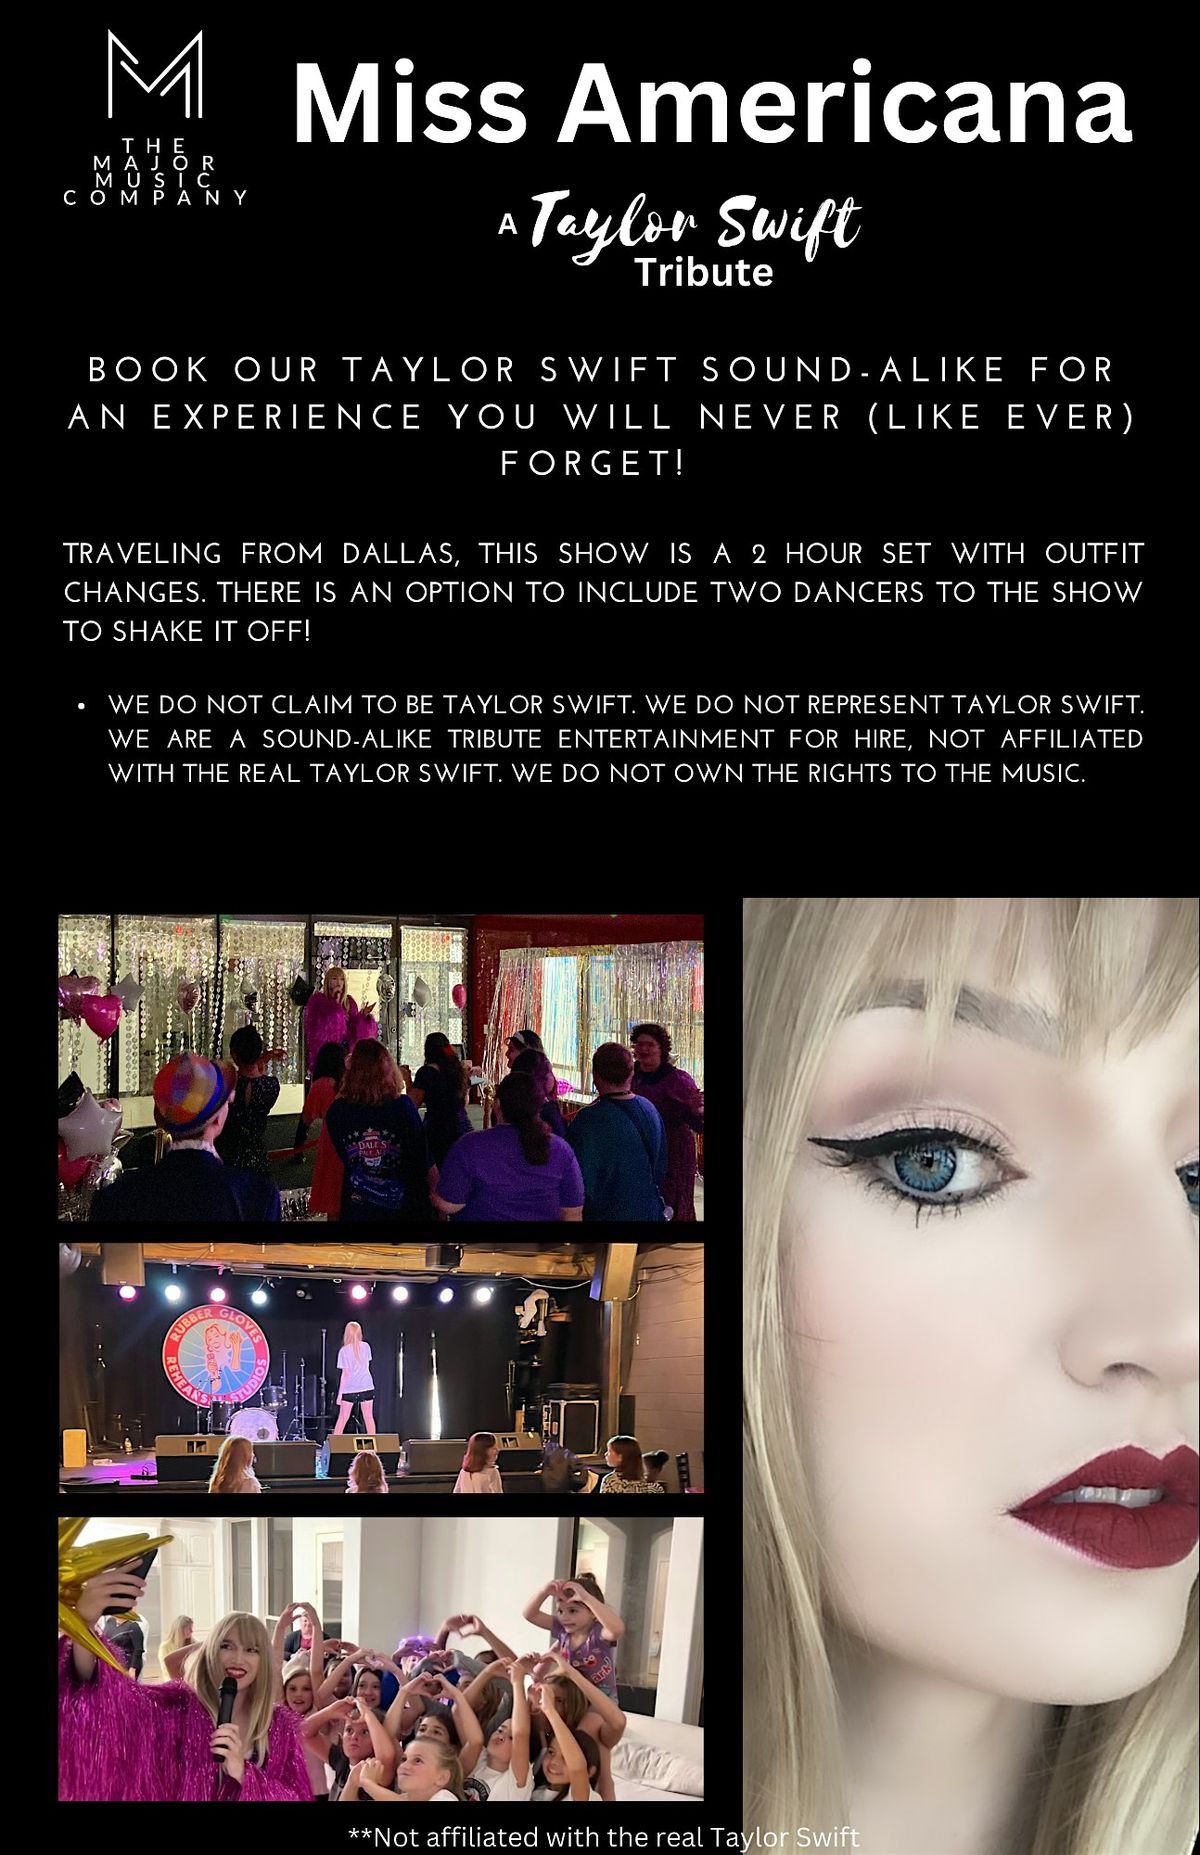 Miss Americana: A Taylor Swift Tribute Concert